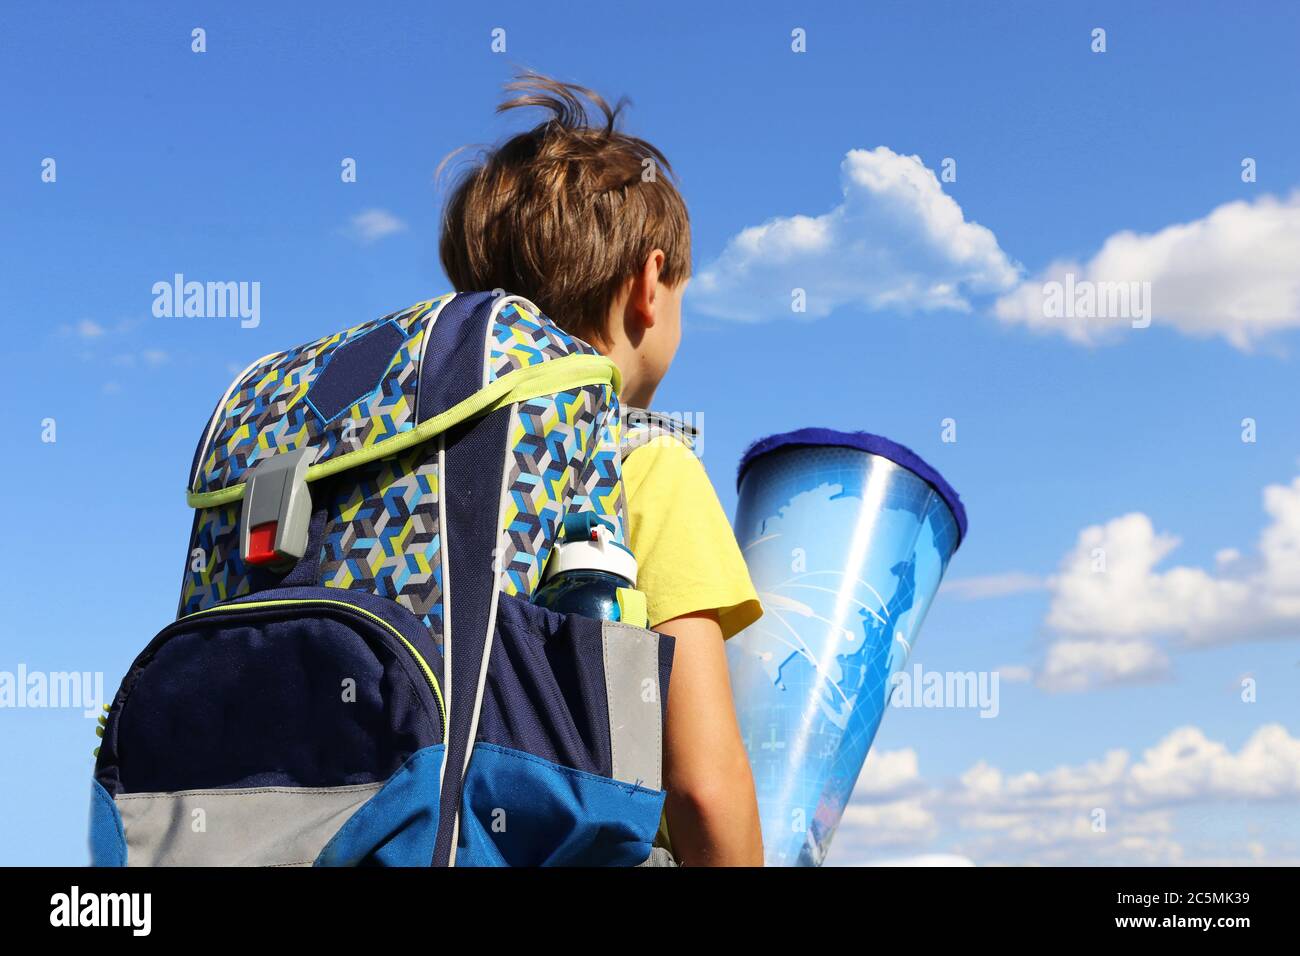 Boy on his way to his first day of school, Model released Stock Photo